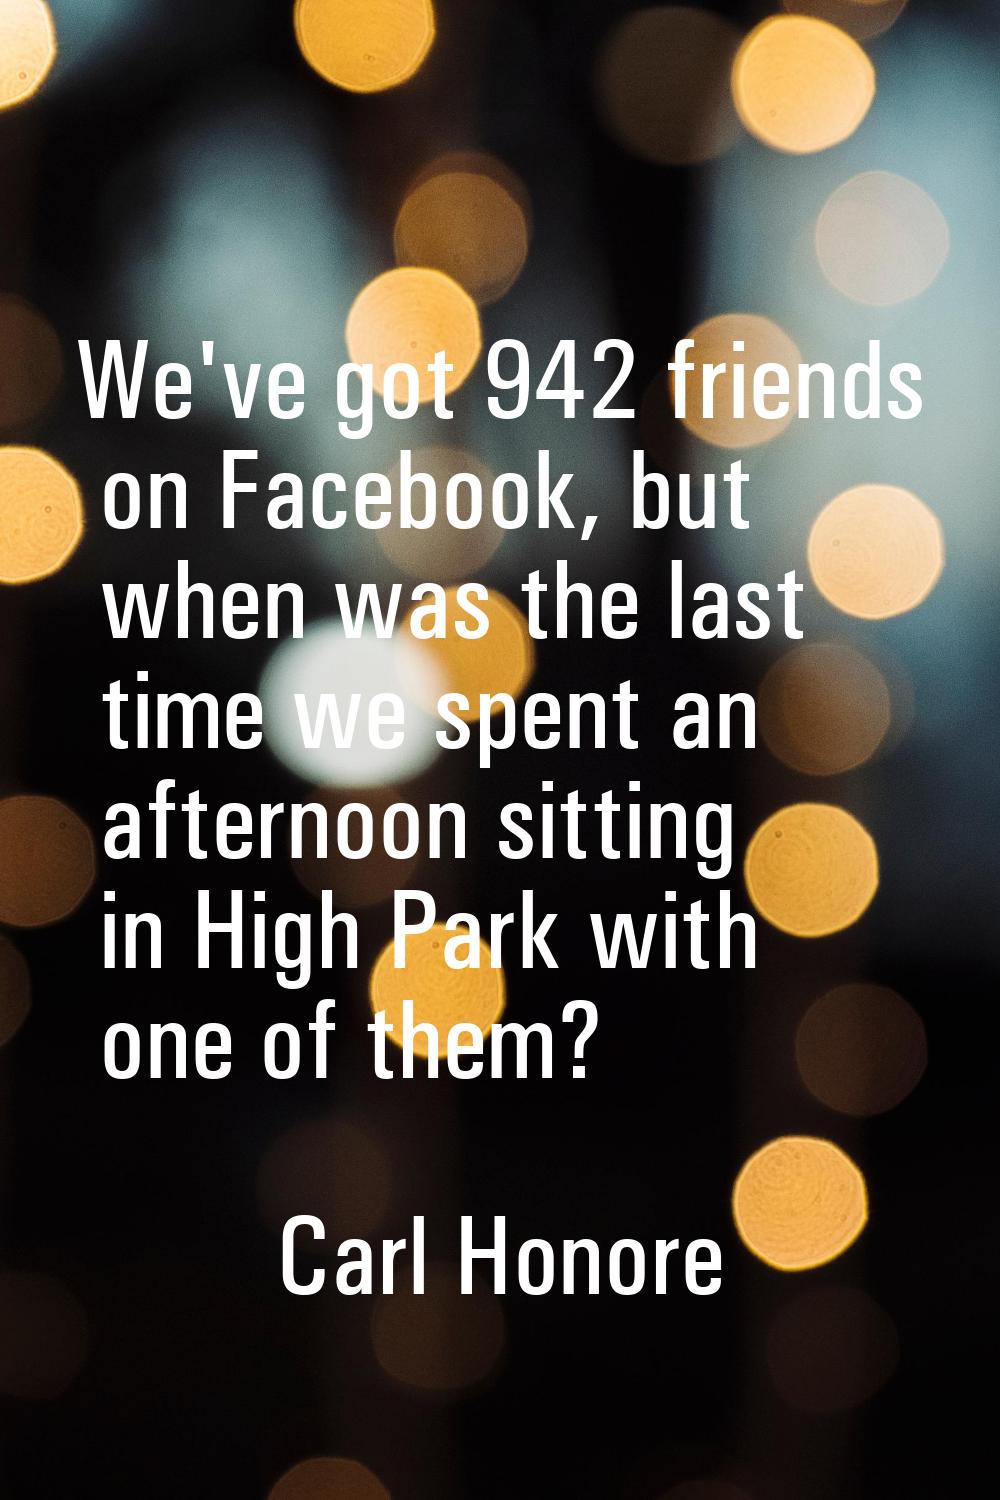 We've got 942 friends on Facebook, but when was the last time we spent an afternoon sitting in High